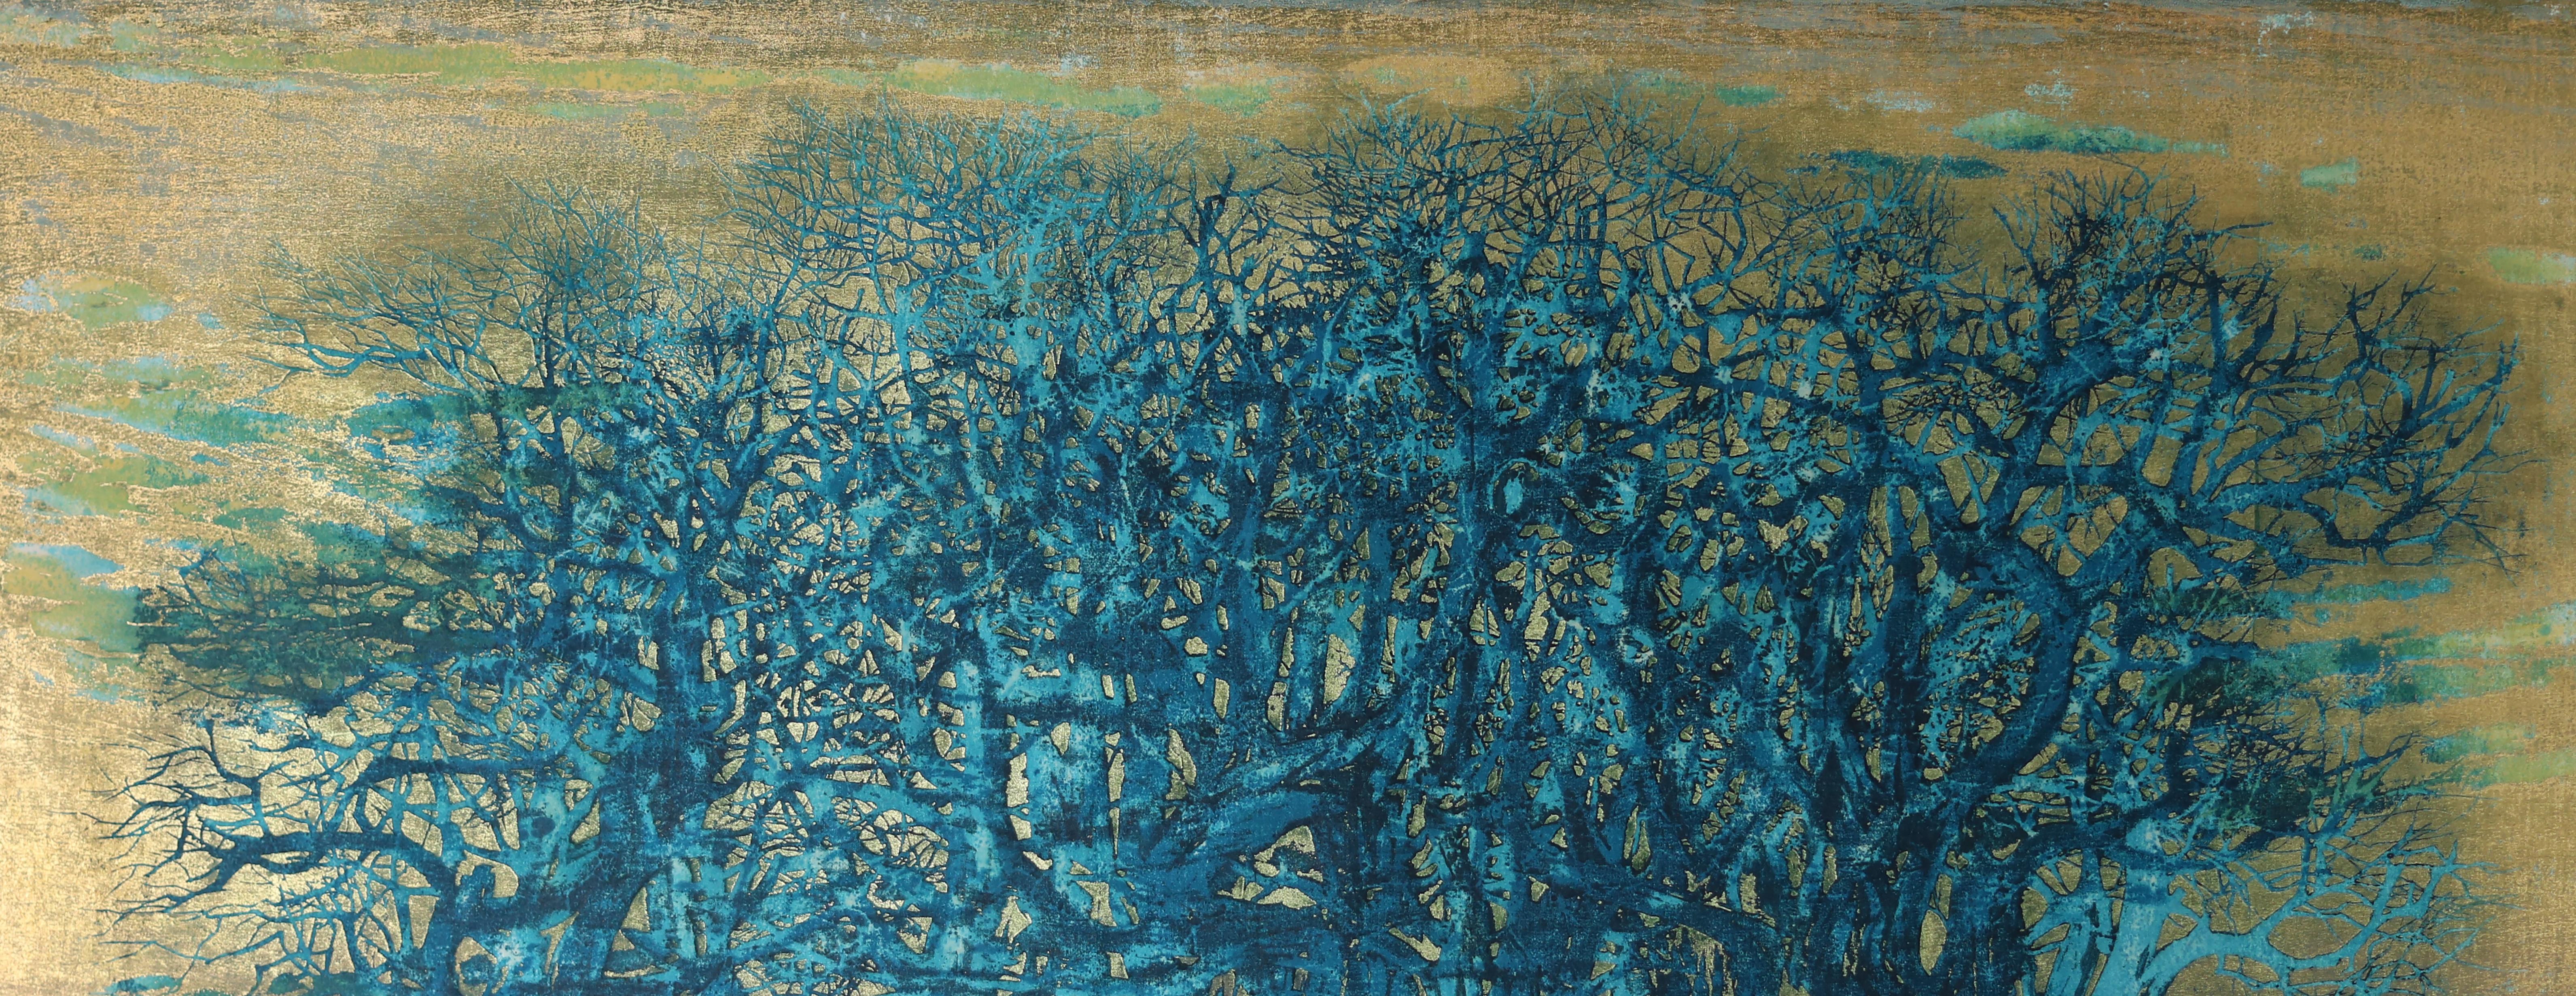 A copse of trees is presented as a unit, as branches and trunks seem to blend together in this oversized work of blue against gold. Pencil signed with a limited edition number of 23/88. See “Joichi Hoshi: Catalog of All Tree Woodblock Prints”,